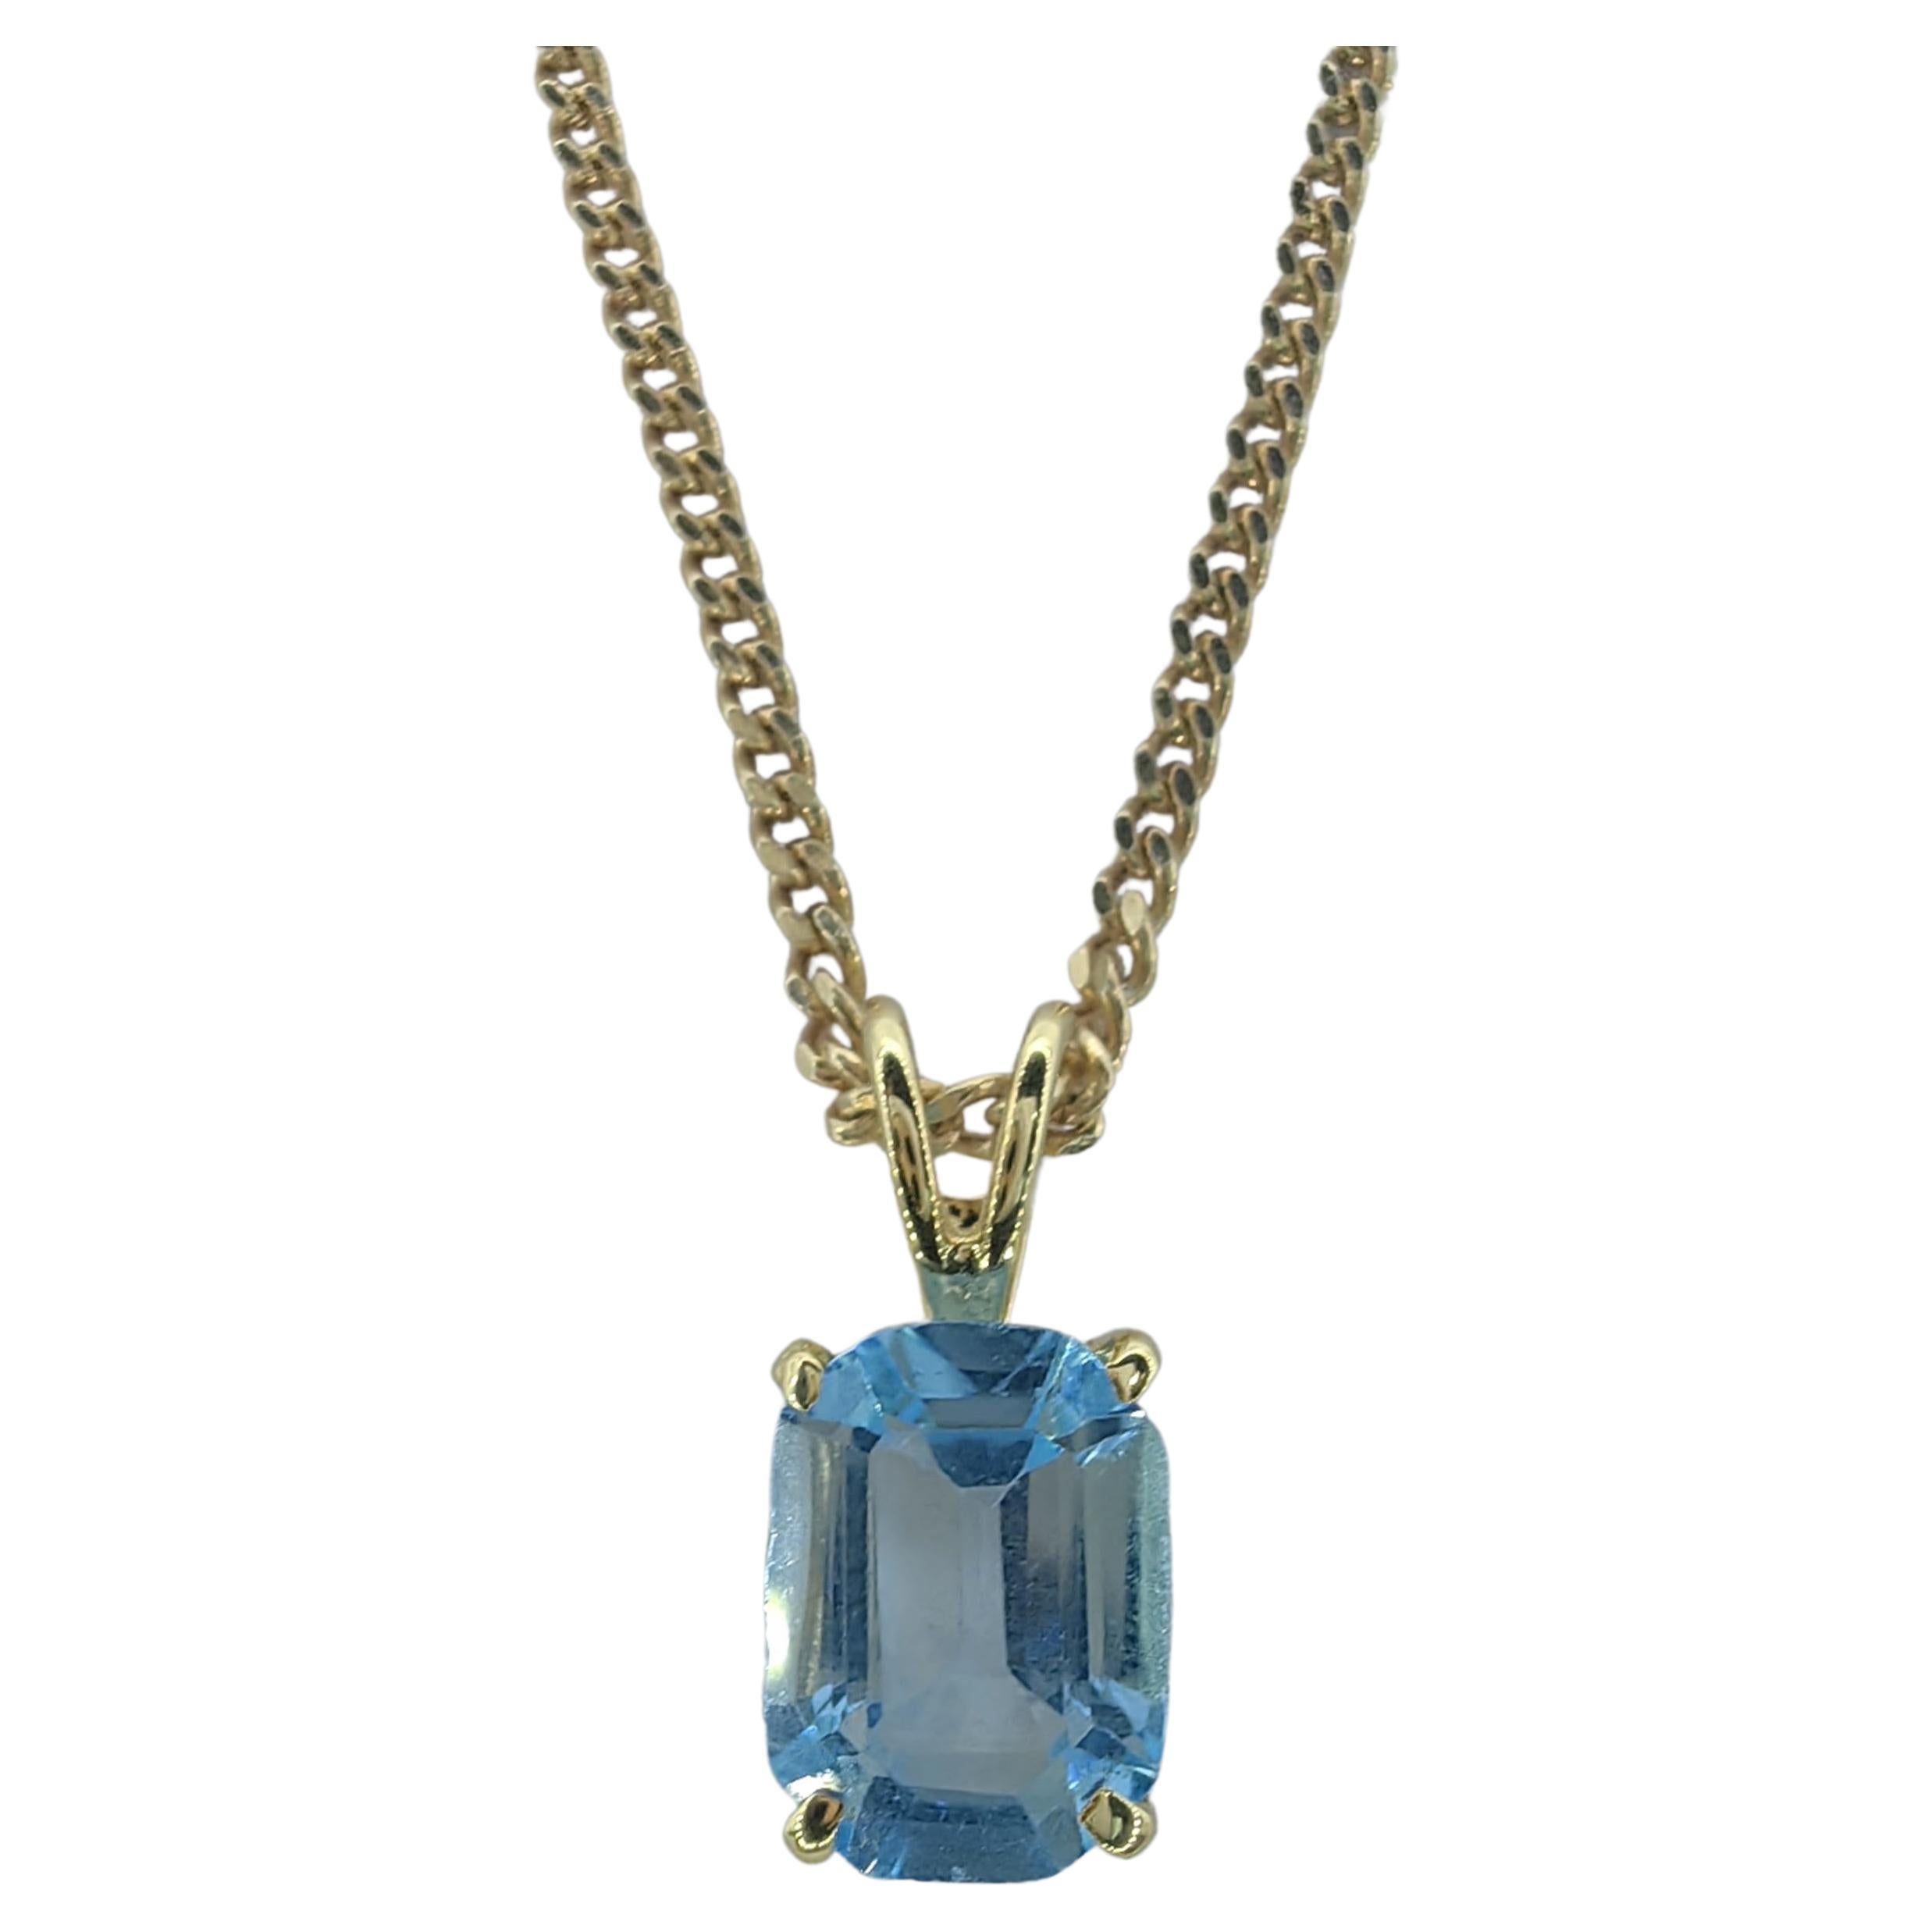 Vintage 1980's Emerald Cut Blue Topaz Necklace Pendant in 14K Yellow Gold #2